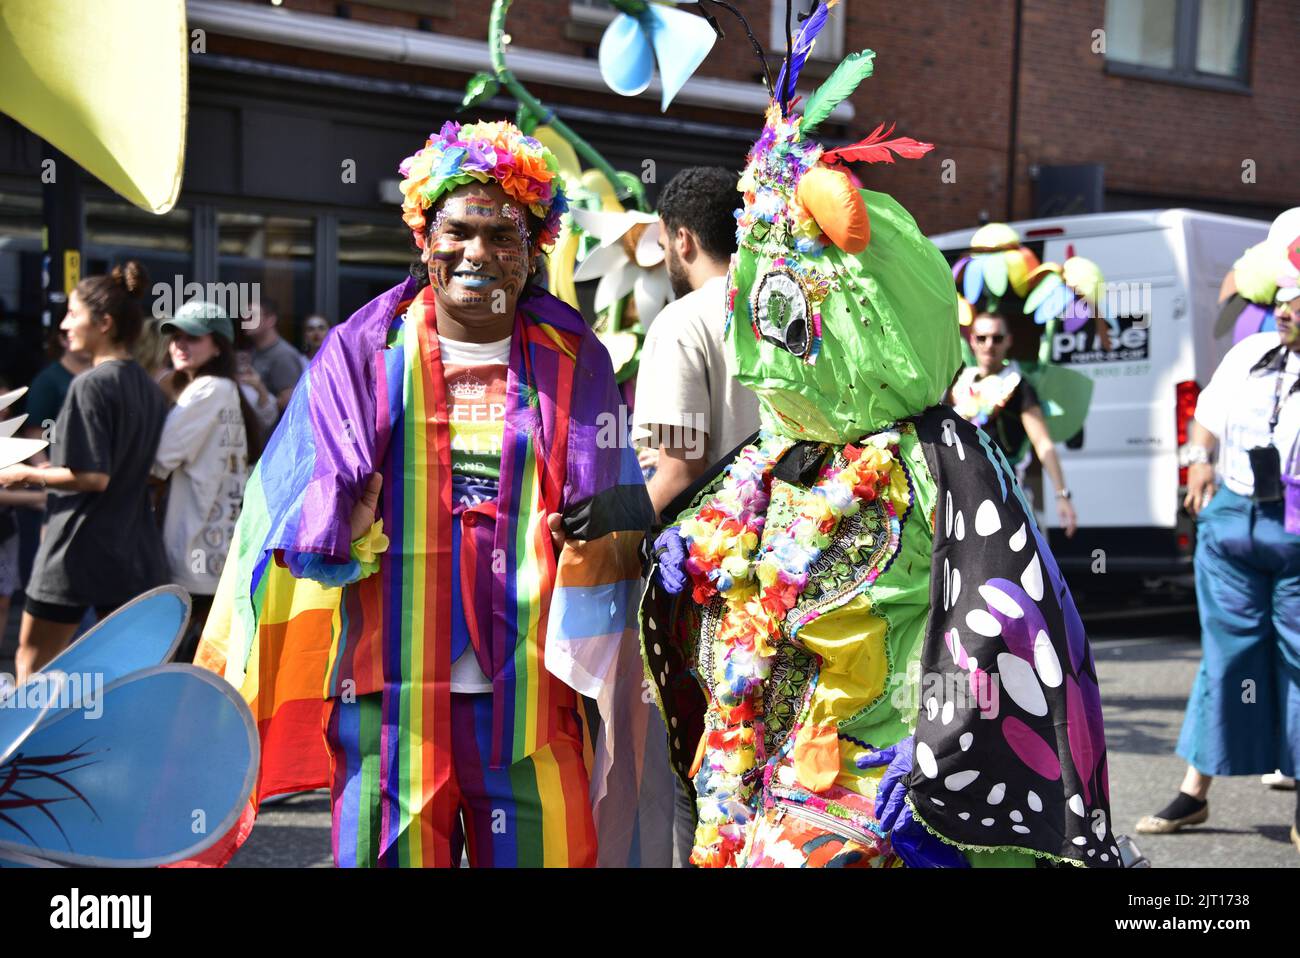 Manchester, UK. 27th August, 2022. Participants get ready to take part in the LGBTQ+ Pride parade, central Manchester, UK, as LGBTQ+ Pride continues over the Bank Holiday weekend 26th to 29th August. Organisers say: 'Manchester Pride is one of the UK's leading LGBTQ+ charities. Our vision is a world where LGBTQ+ people are free to live and love without prejudice. We’re part of a global Pride movement celebrating LGBTQ+ equality and challenging discrimination.' Credit: Terry Waller/Alamy Live News Stock Photo